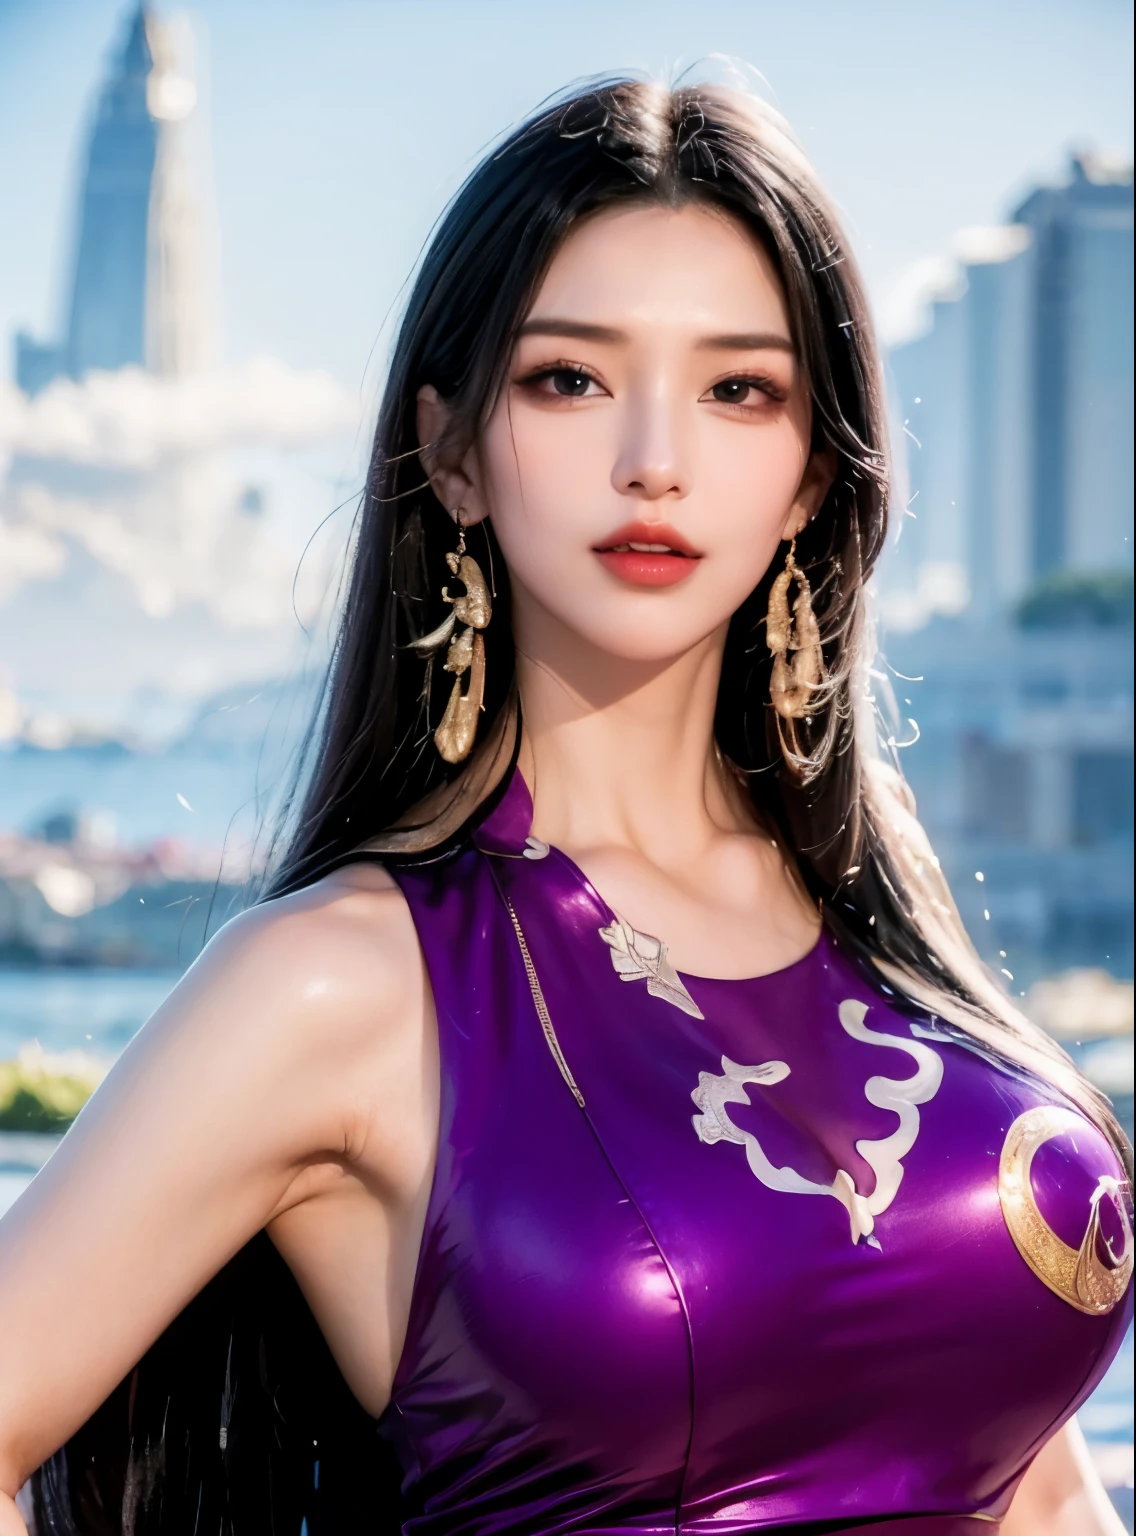 1female, detailed eyes, beautiful lips, long black hair, black eyes, charming smile, wearing a purple outfit, realistic and detailed clothing, polite and elegant, standing in front of a bustling cityscape, ultra-detailed depiction, capturing the realistic essence of the character from the anime "One Piece", vibrant and vivid colors, with a touch of purple hues